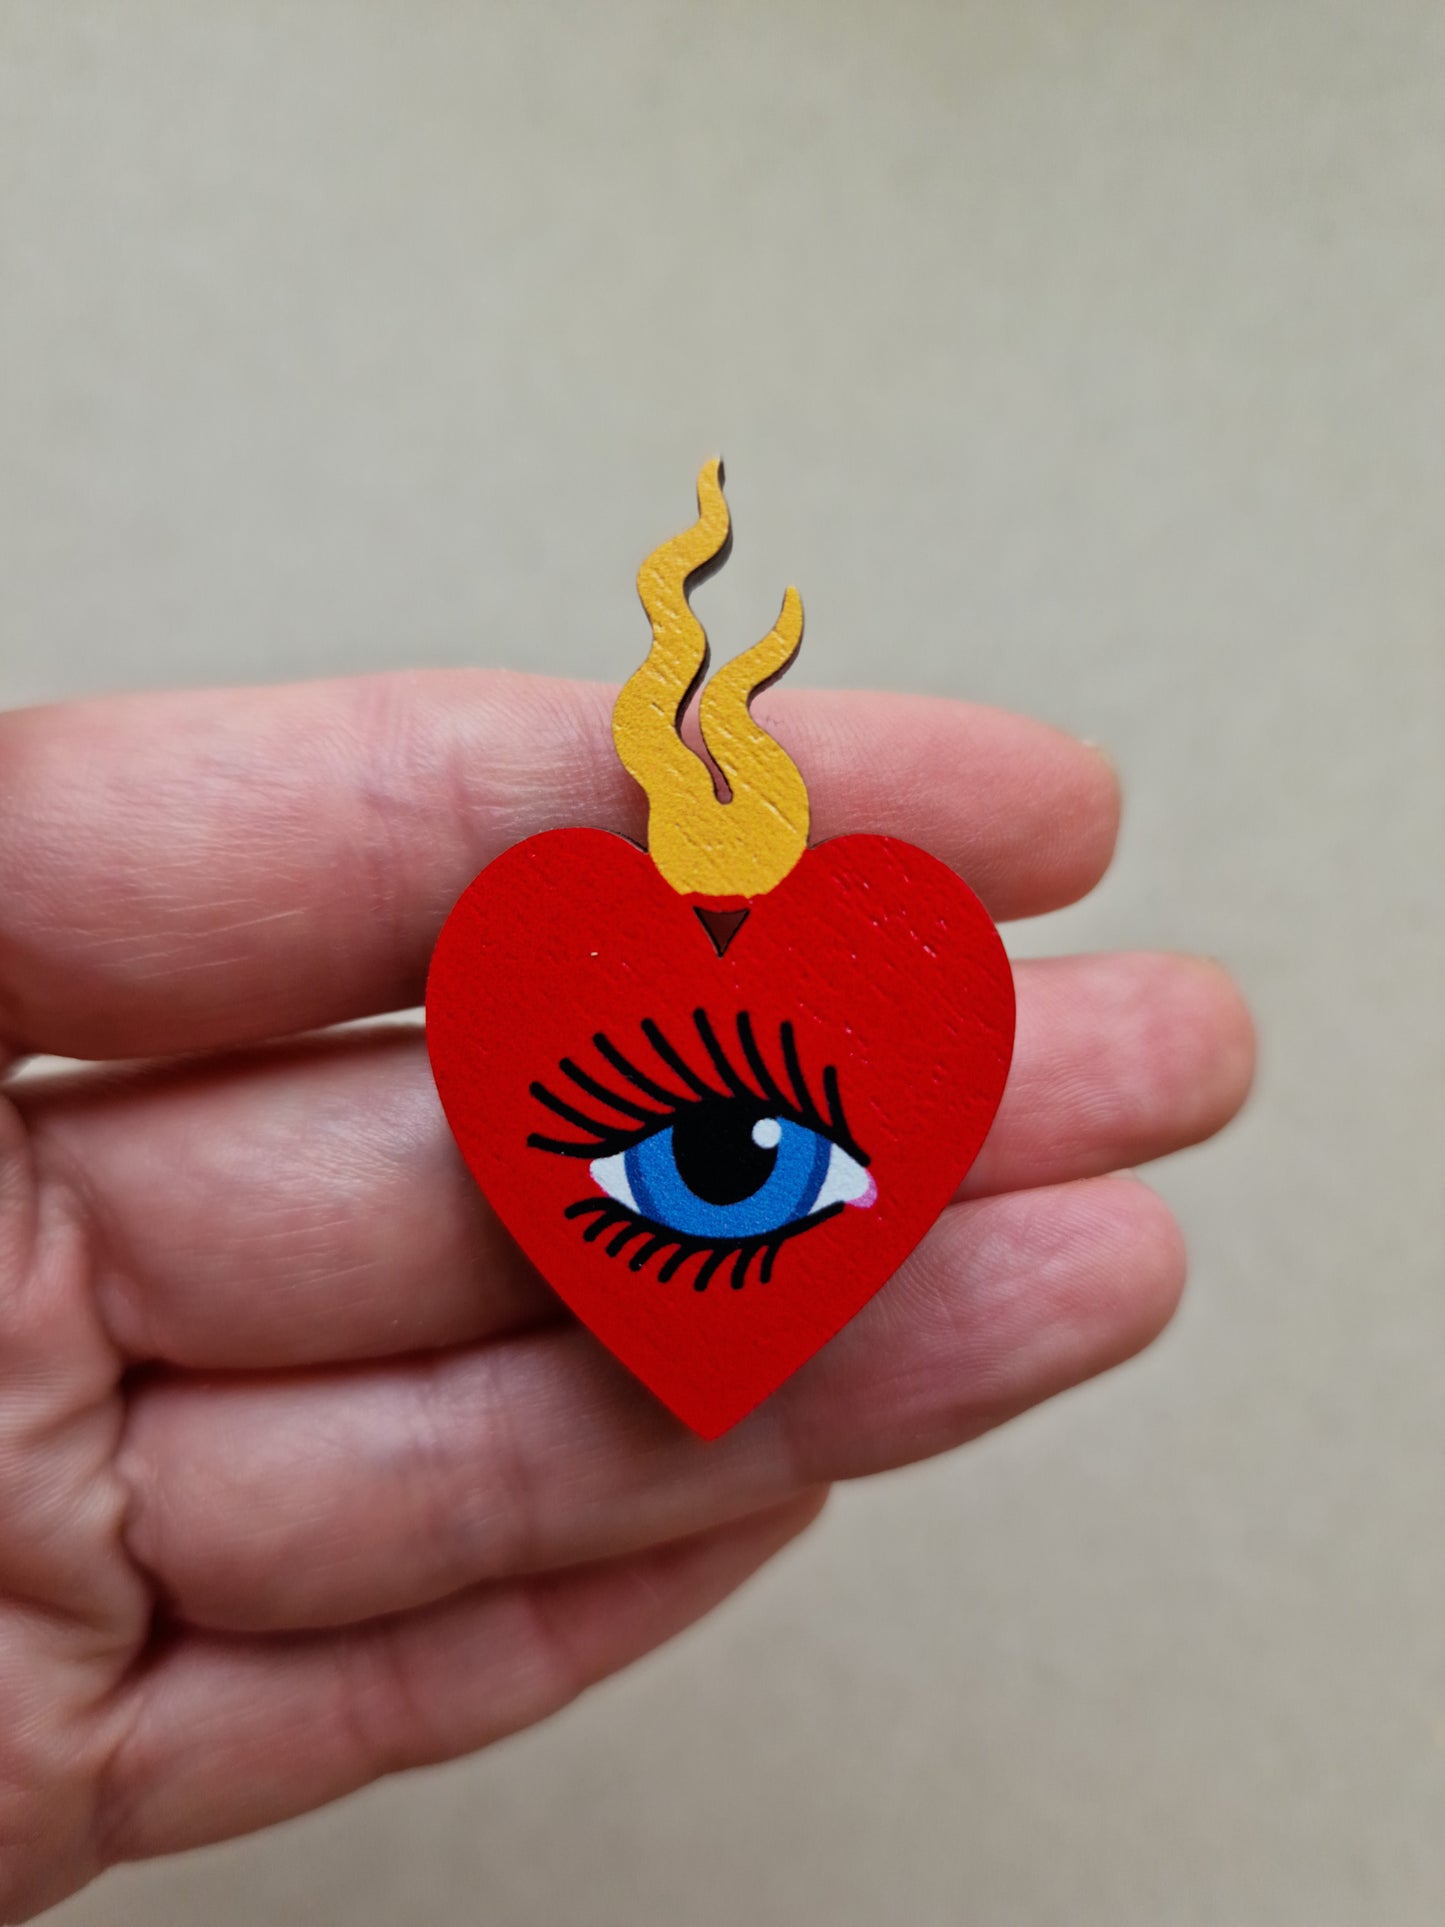 SECONDS Sacred Heart Brooch